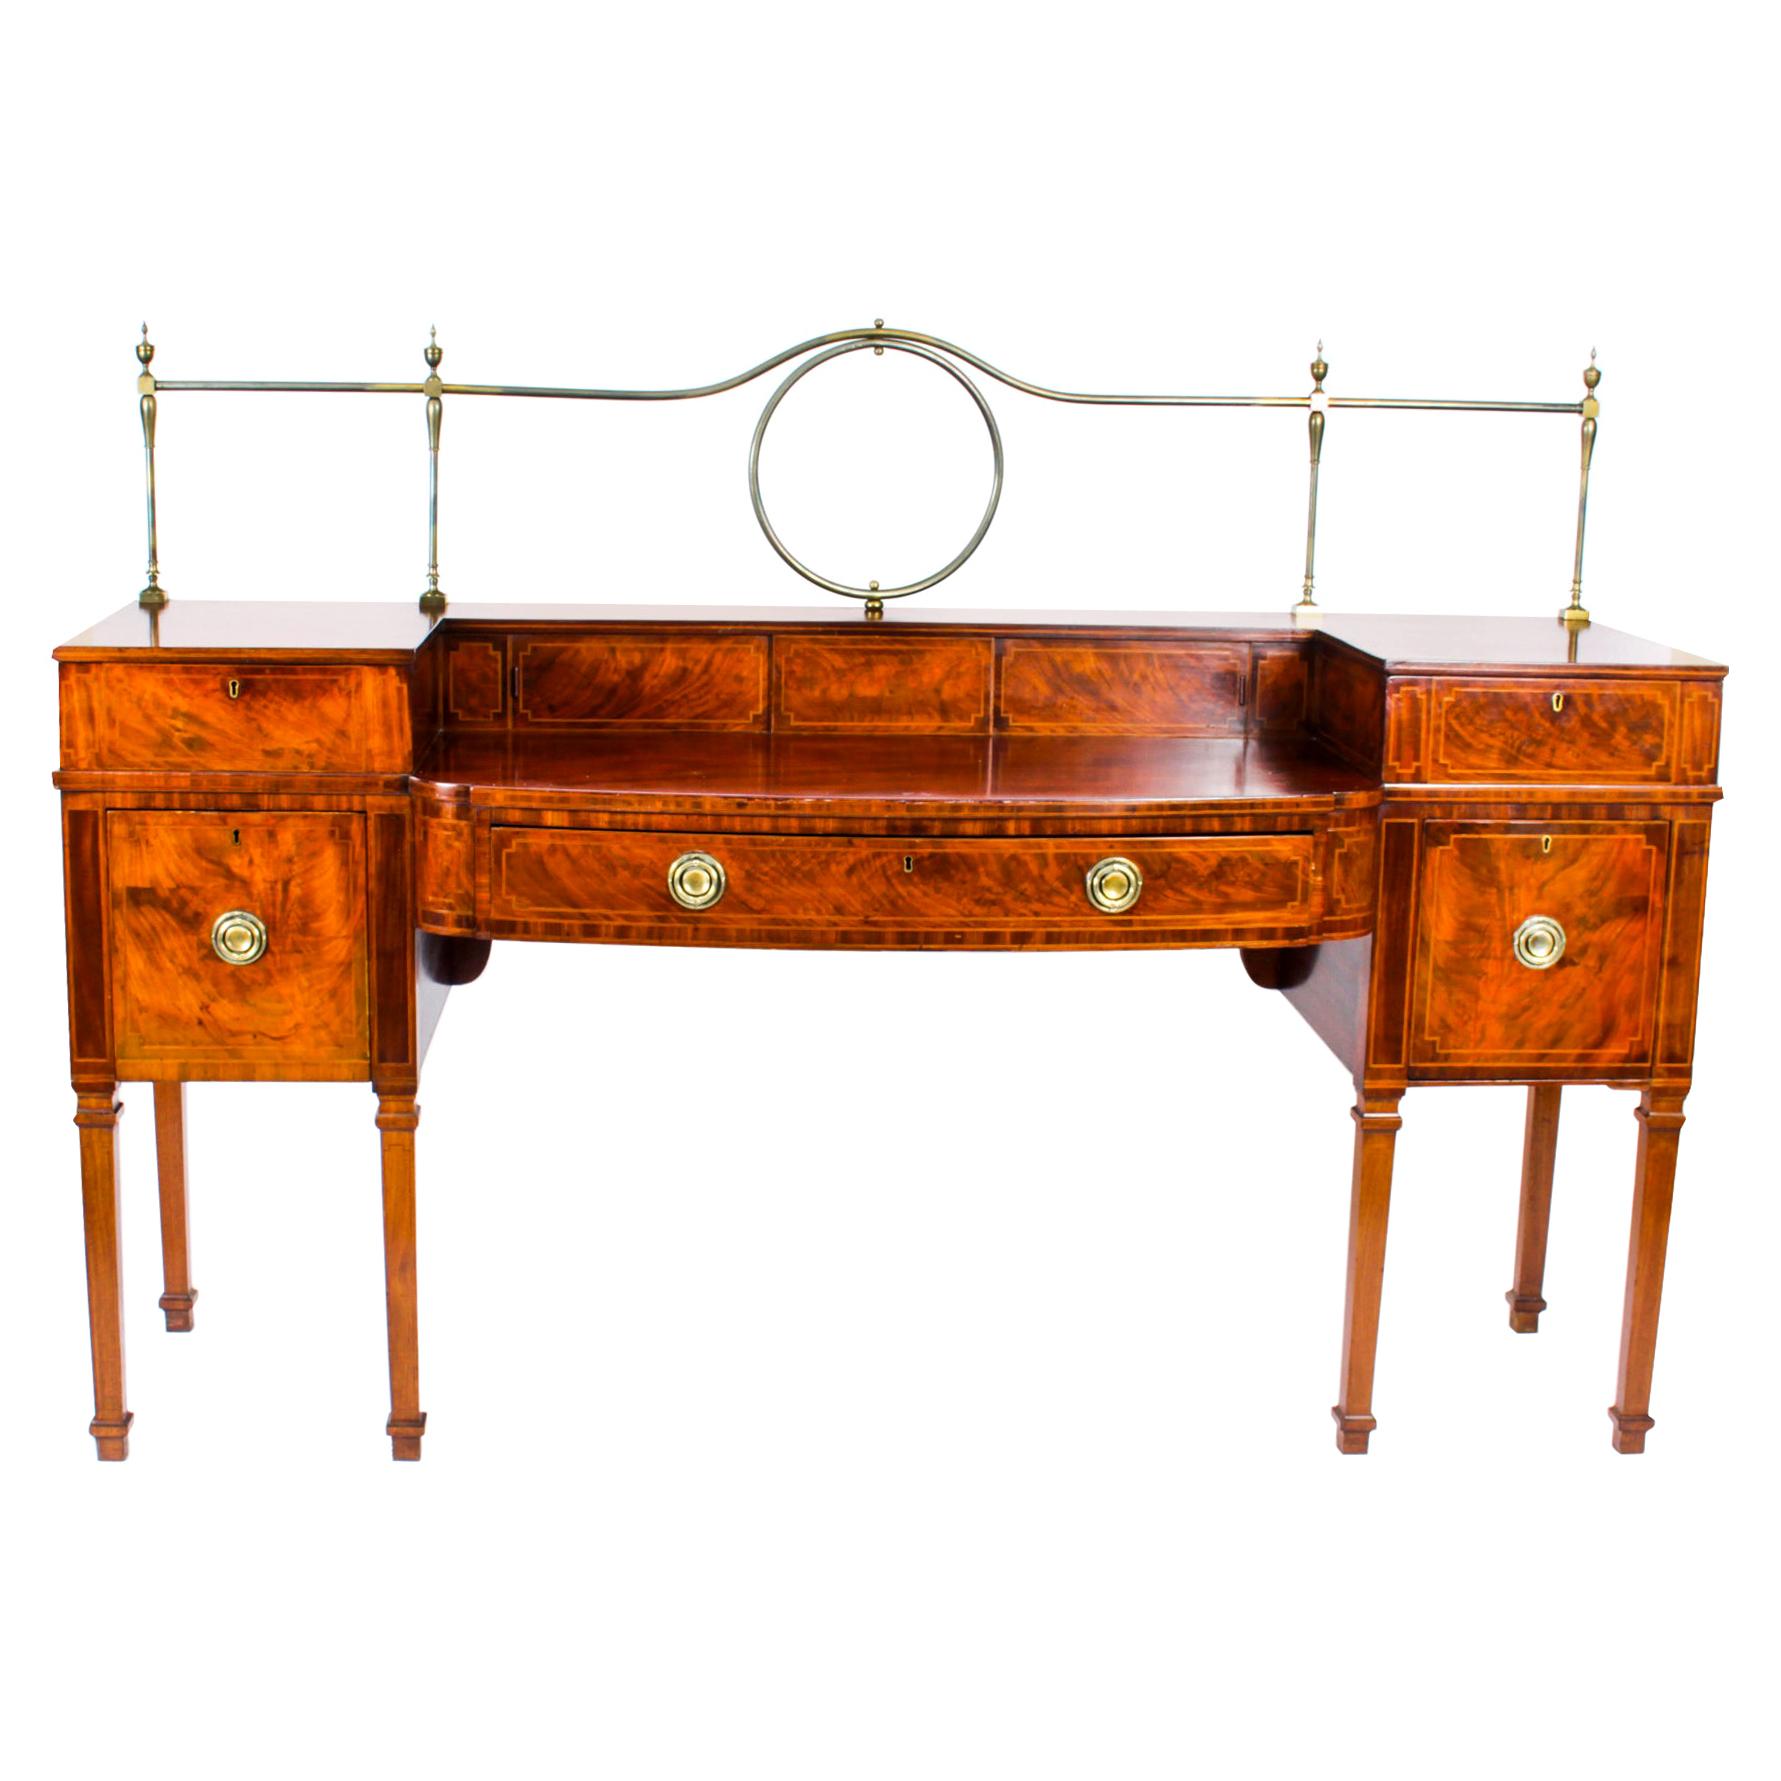 Antique Flame Mahogany and Satinwood Inlaid Sideboard, 19th Century